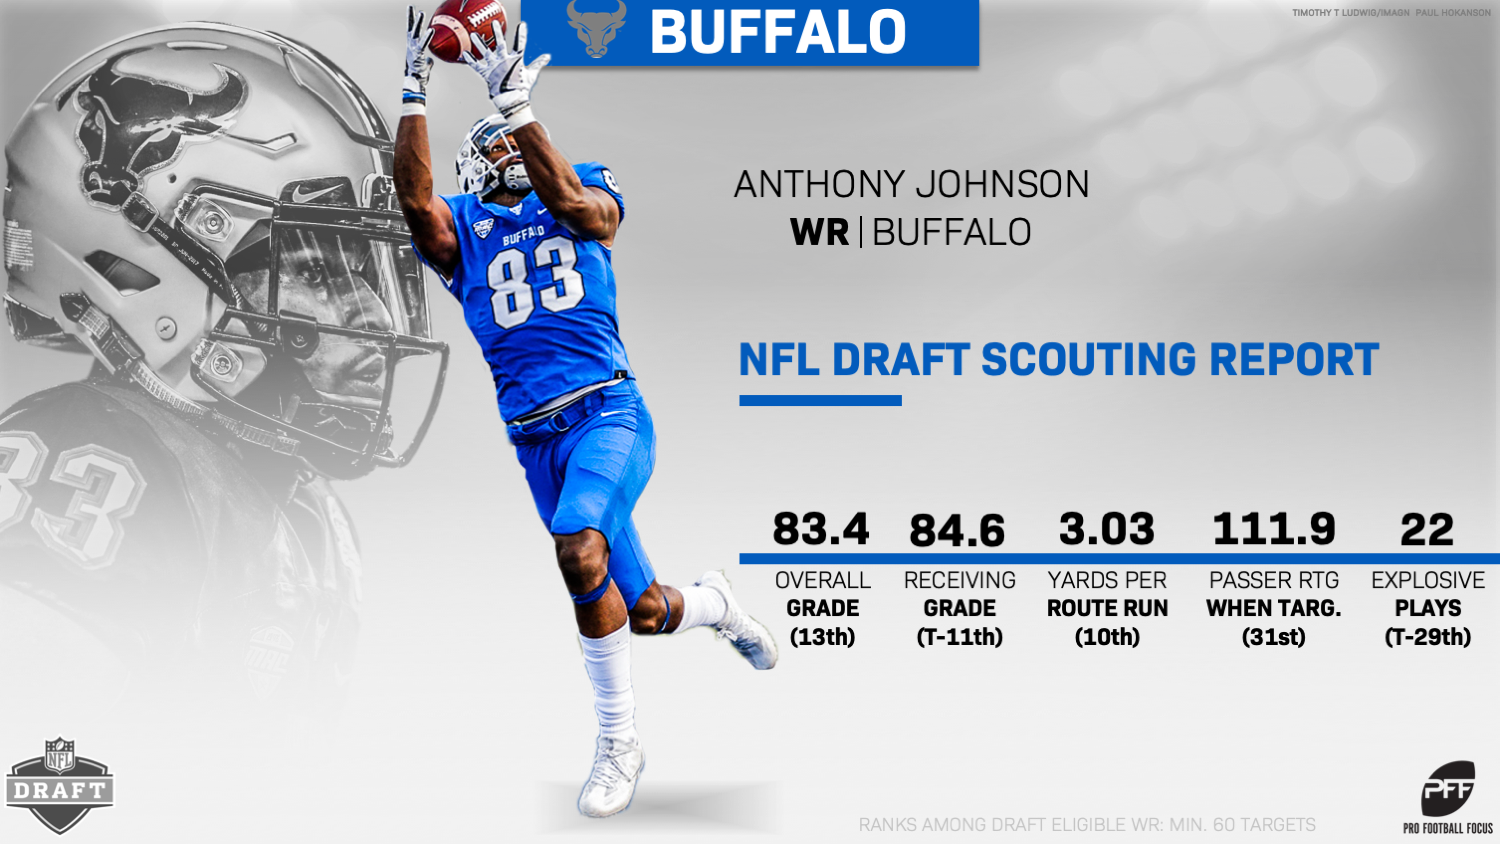 Buffalo WR Anthony Johnson proves just how deep the 2019 NFL Draft